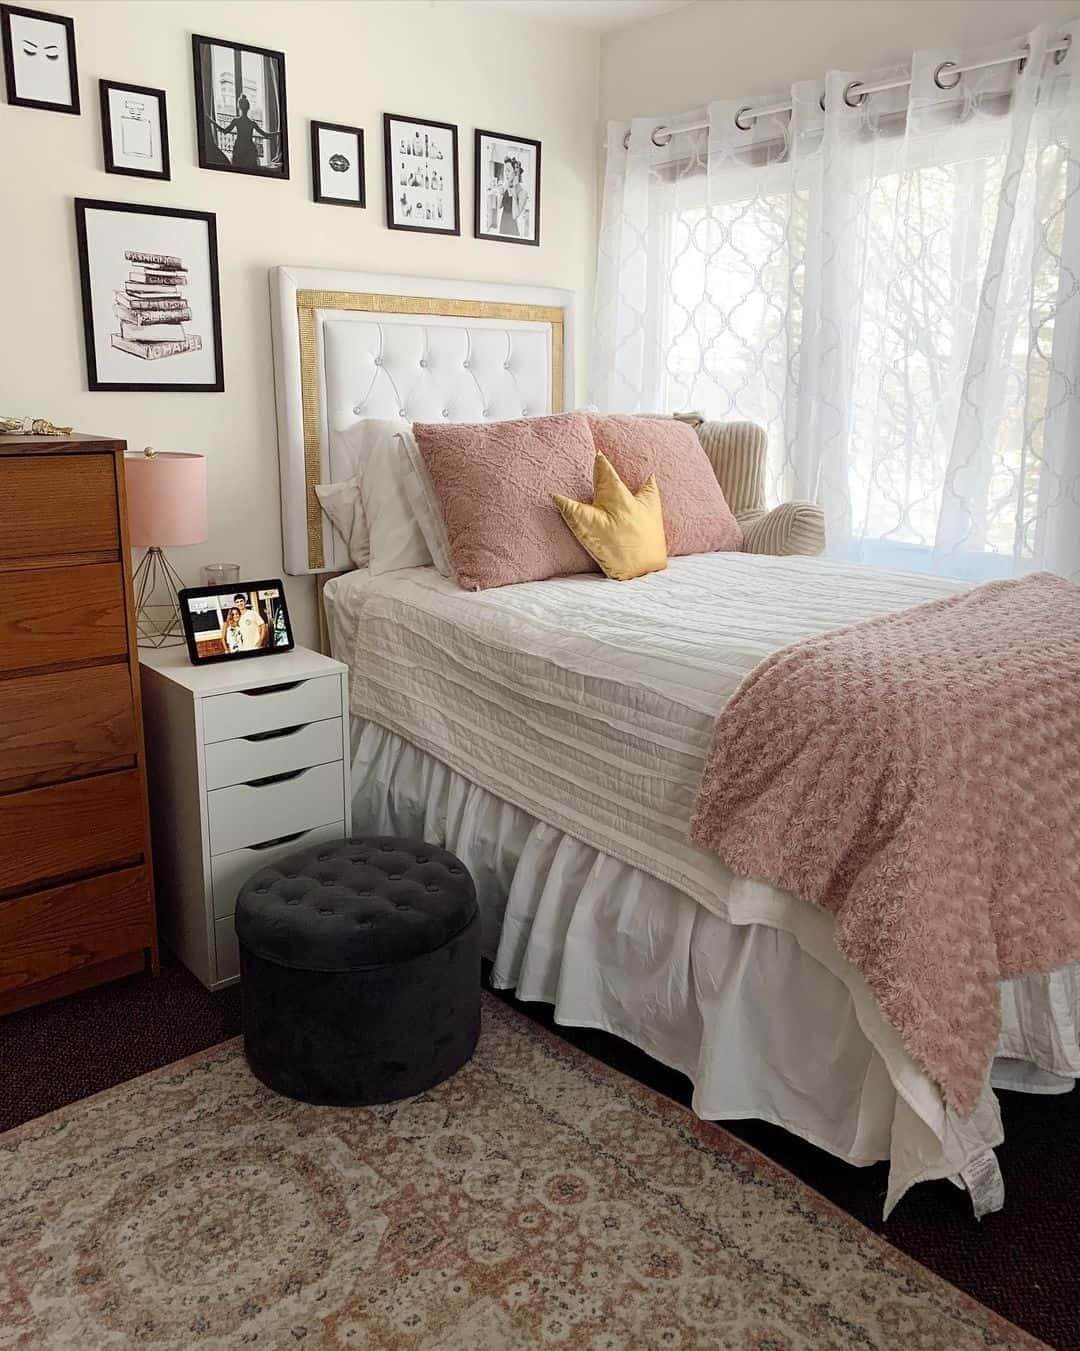 How To Make Dorm Furniture Look Better (11 Easy Tips)